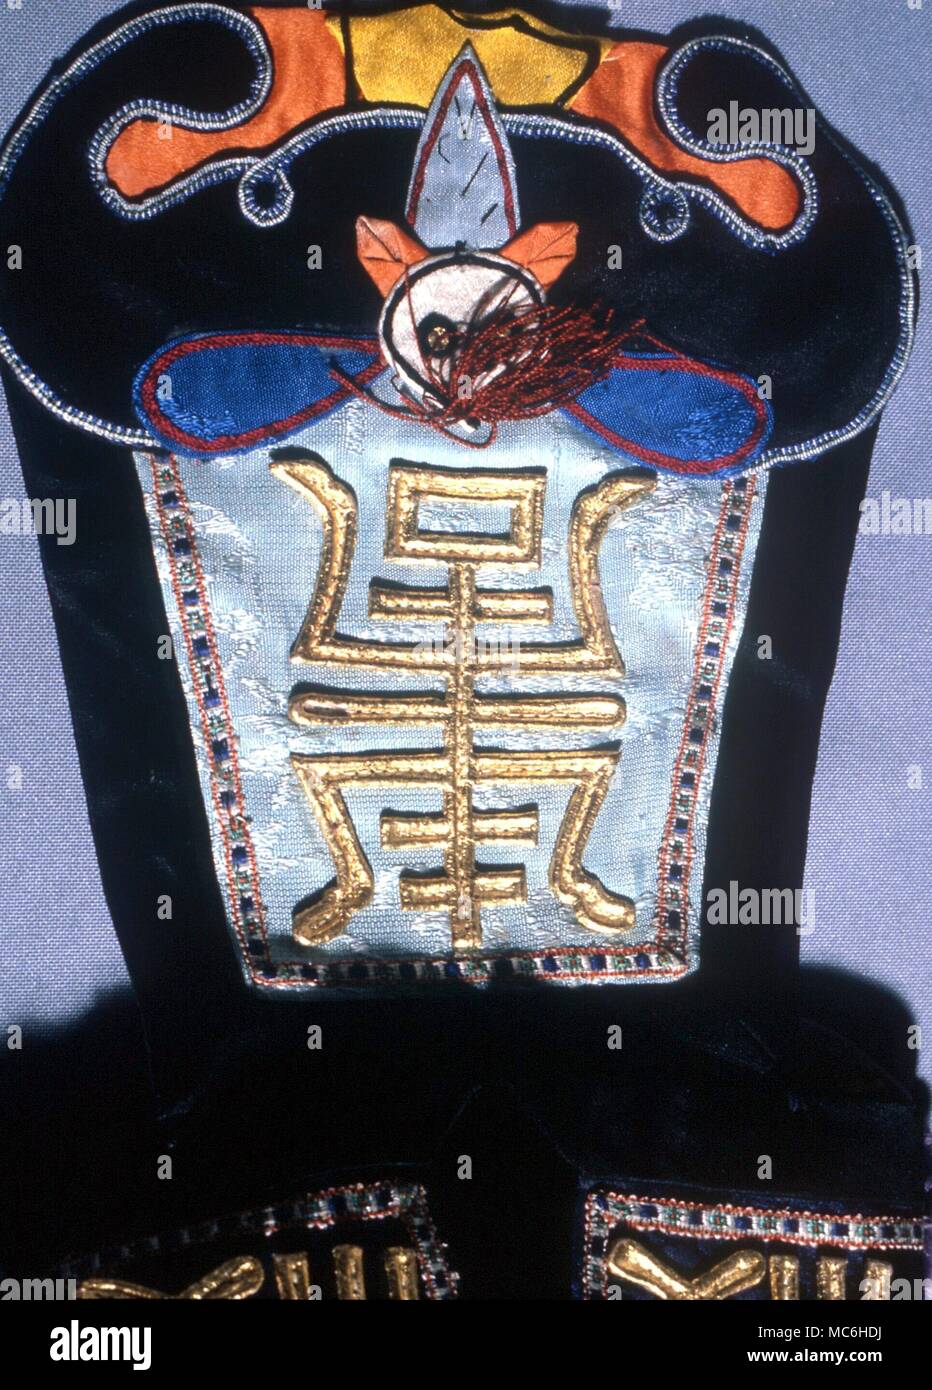 AMULETS - Chinese formal character evoking well being on the wearer. Detail of child's hat, from Northern China, now in private collection, Hong Kong Stock Photo